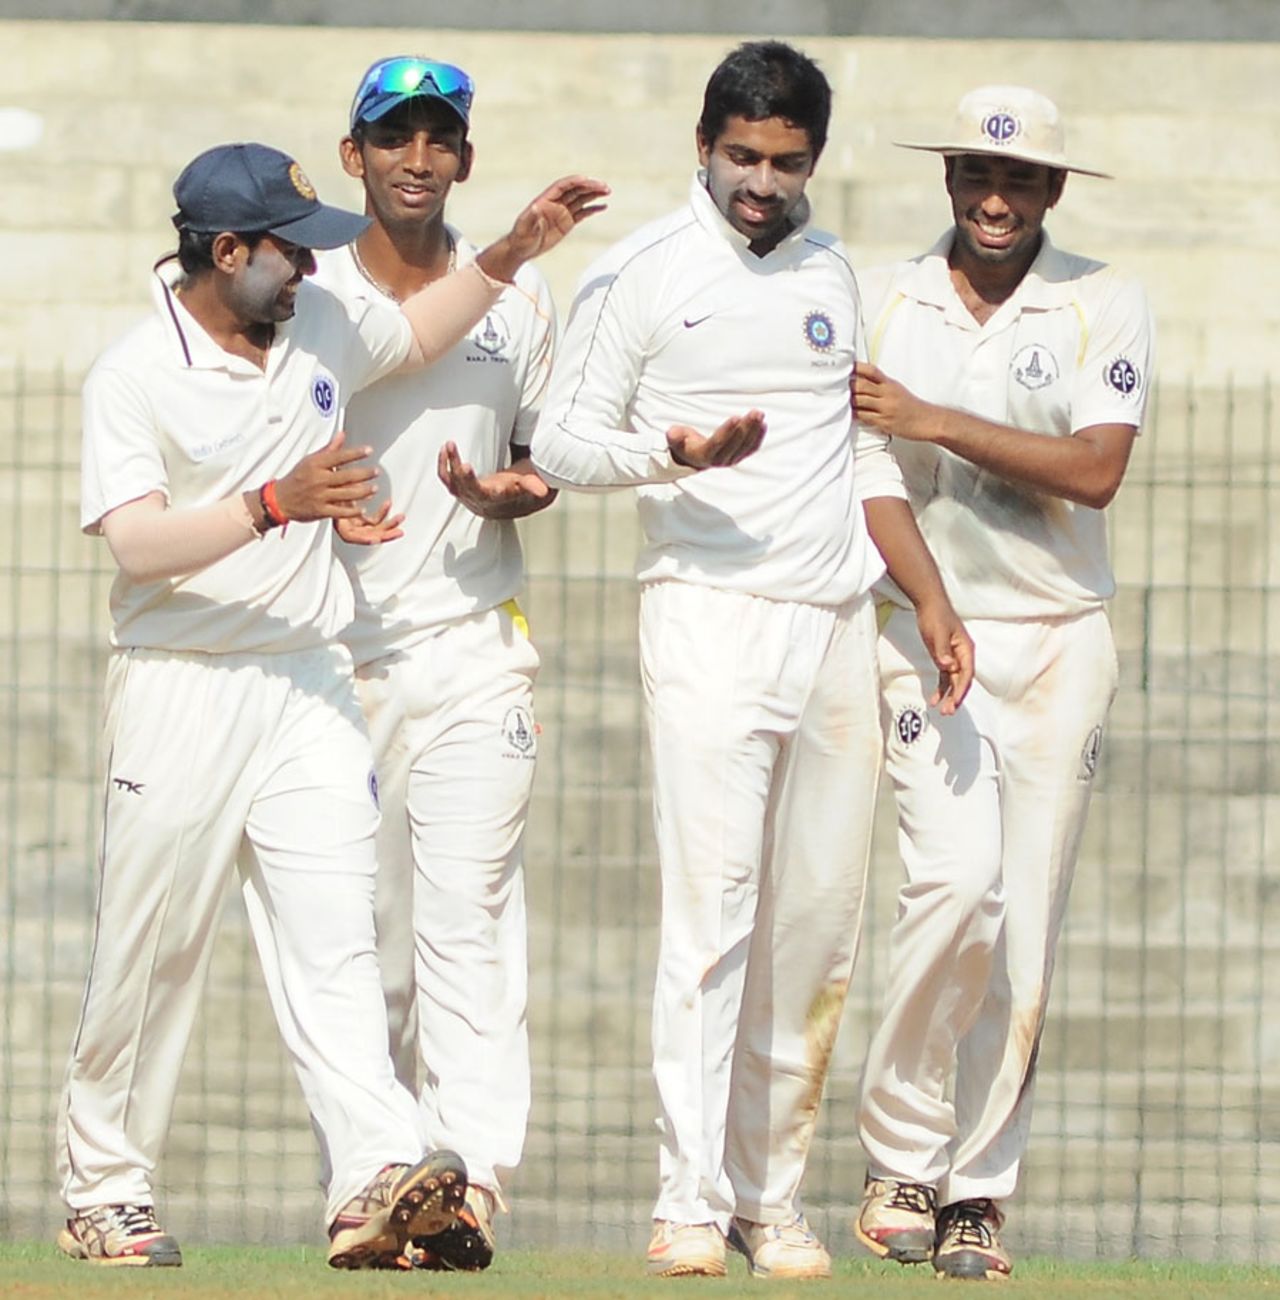 Abhinav Mukund is congratulated by team mates after picking up a wicket, South Zone v West Zone, Duleep Trophy, Day 3, Chennai, October 5, 2013